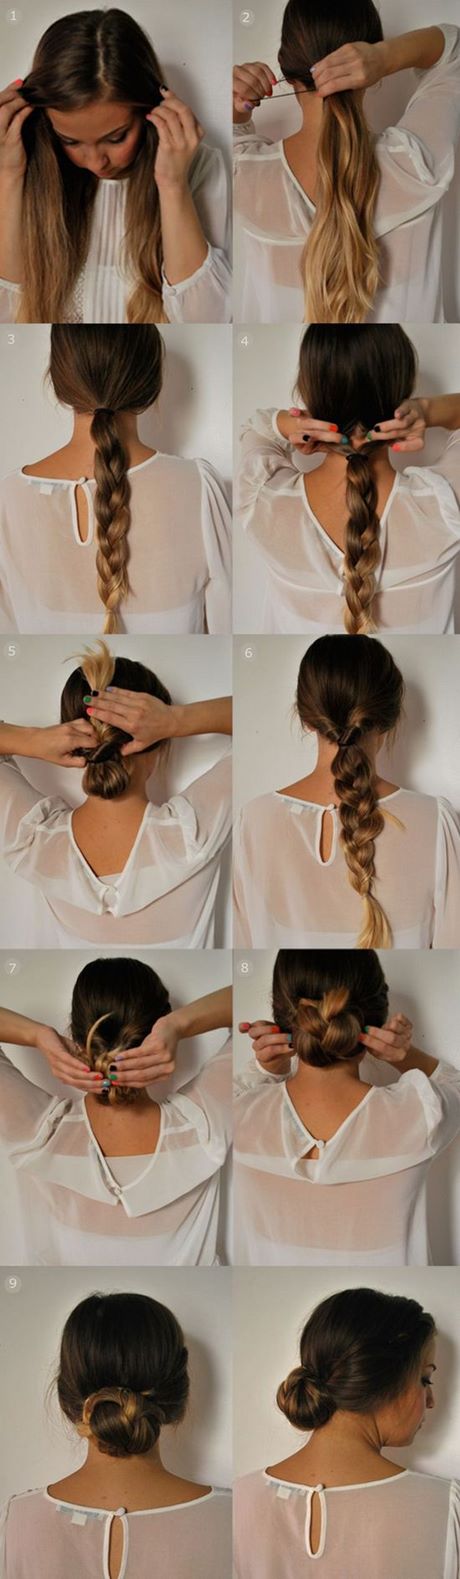 quick-easy-pretty-hairstyles-04_10 Quick easy pretty hairstyles